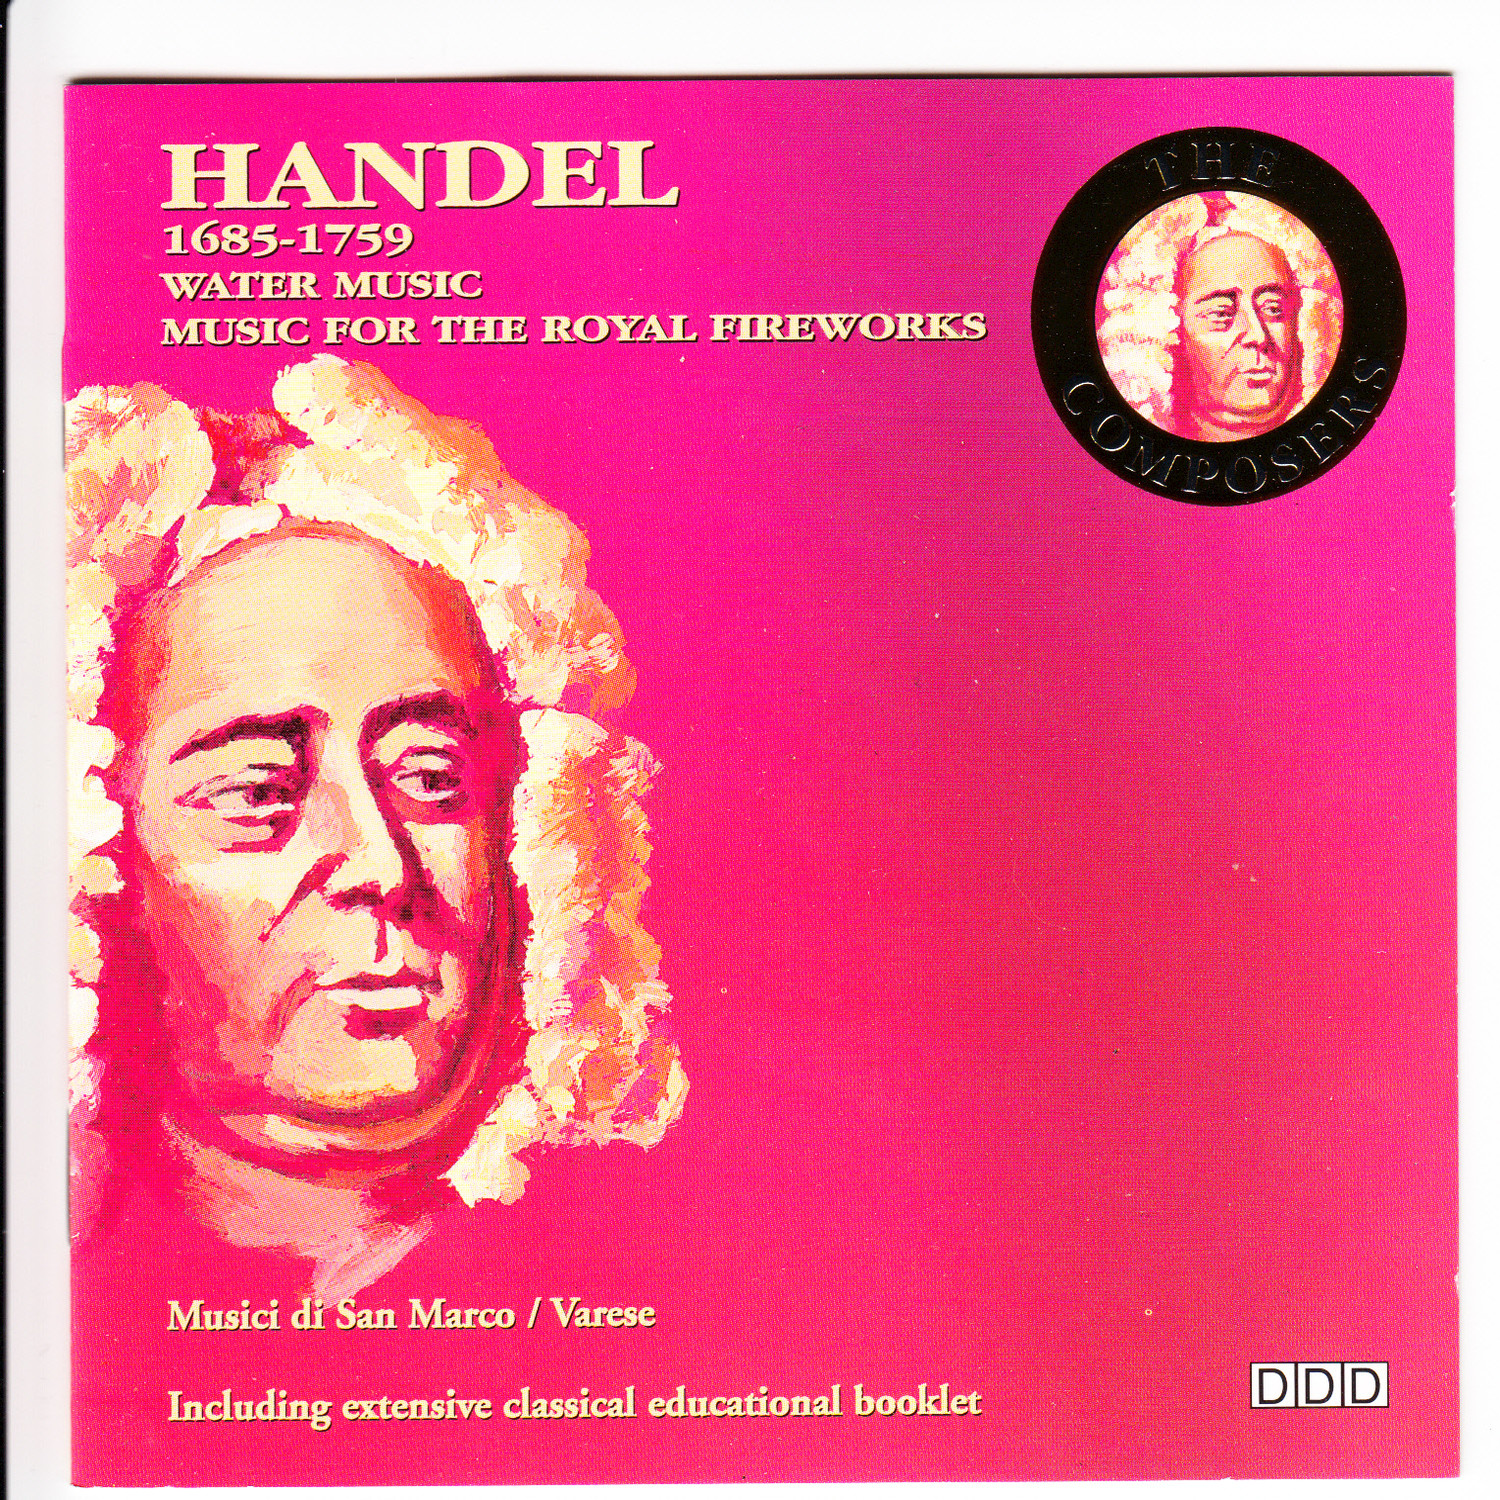 Handel - The Composers. Water Music, Music for the Royal Fireworks